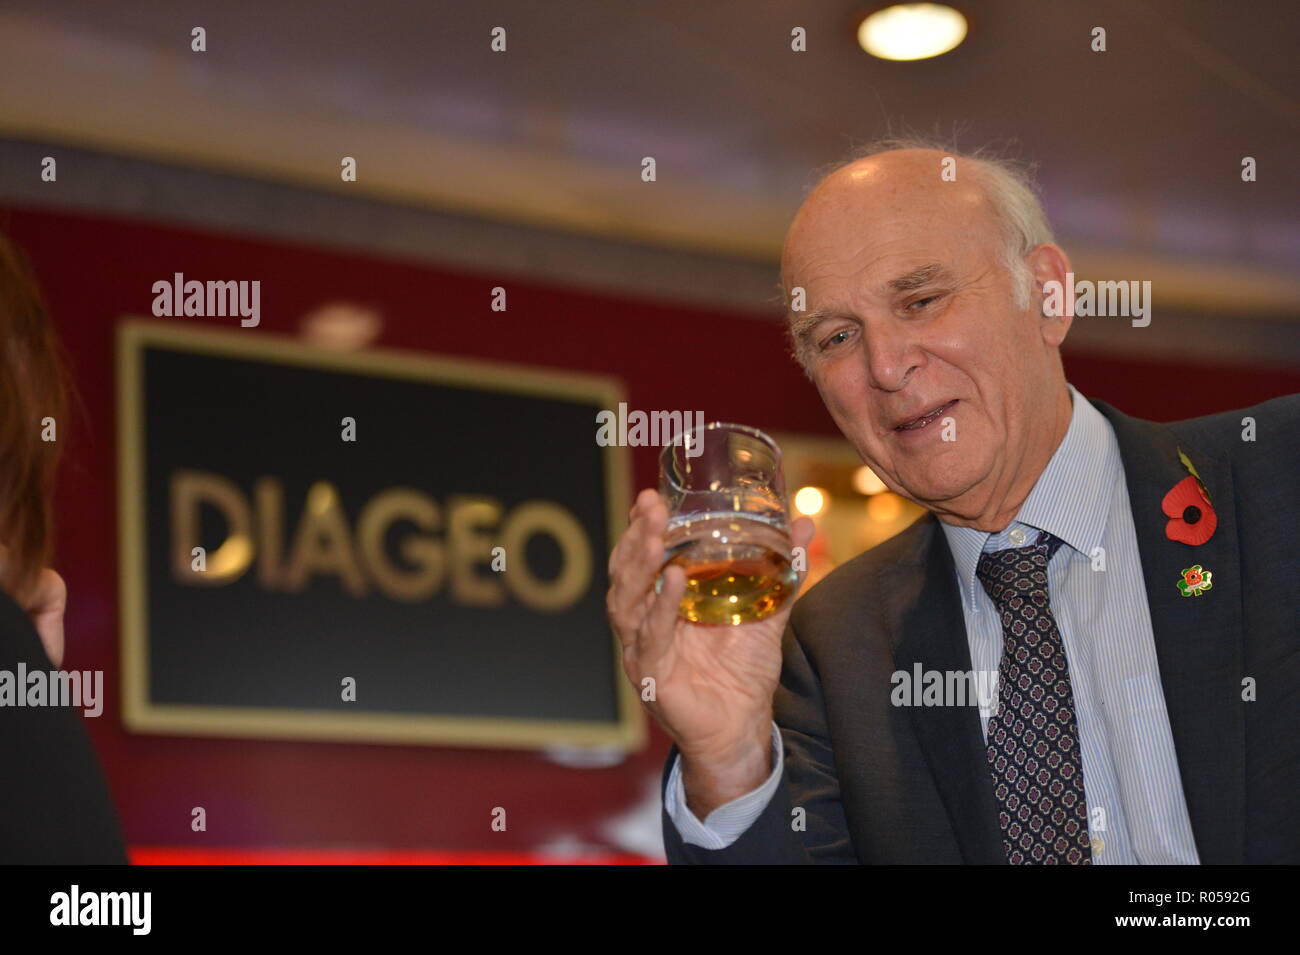 Edinburgh, UK. 2nd Nov 2018. 2nd November 2018, Edinburgh. Liberal Democrat leader Vince Cable joins Edinburgh West MP Christine Jardine on a visit to the Edinburgh offices of Diageo, one of the world's biggest distillers where the former Business Secretary will discuss the budget and Brexit with company executives. Credit: Colin Fisher/Alamy Live News Stock Photo